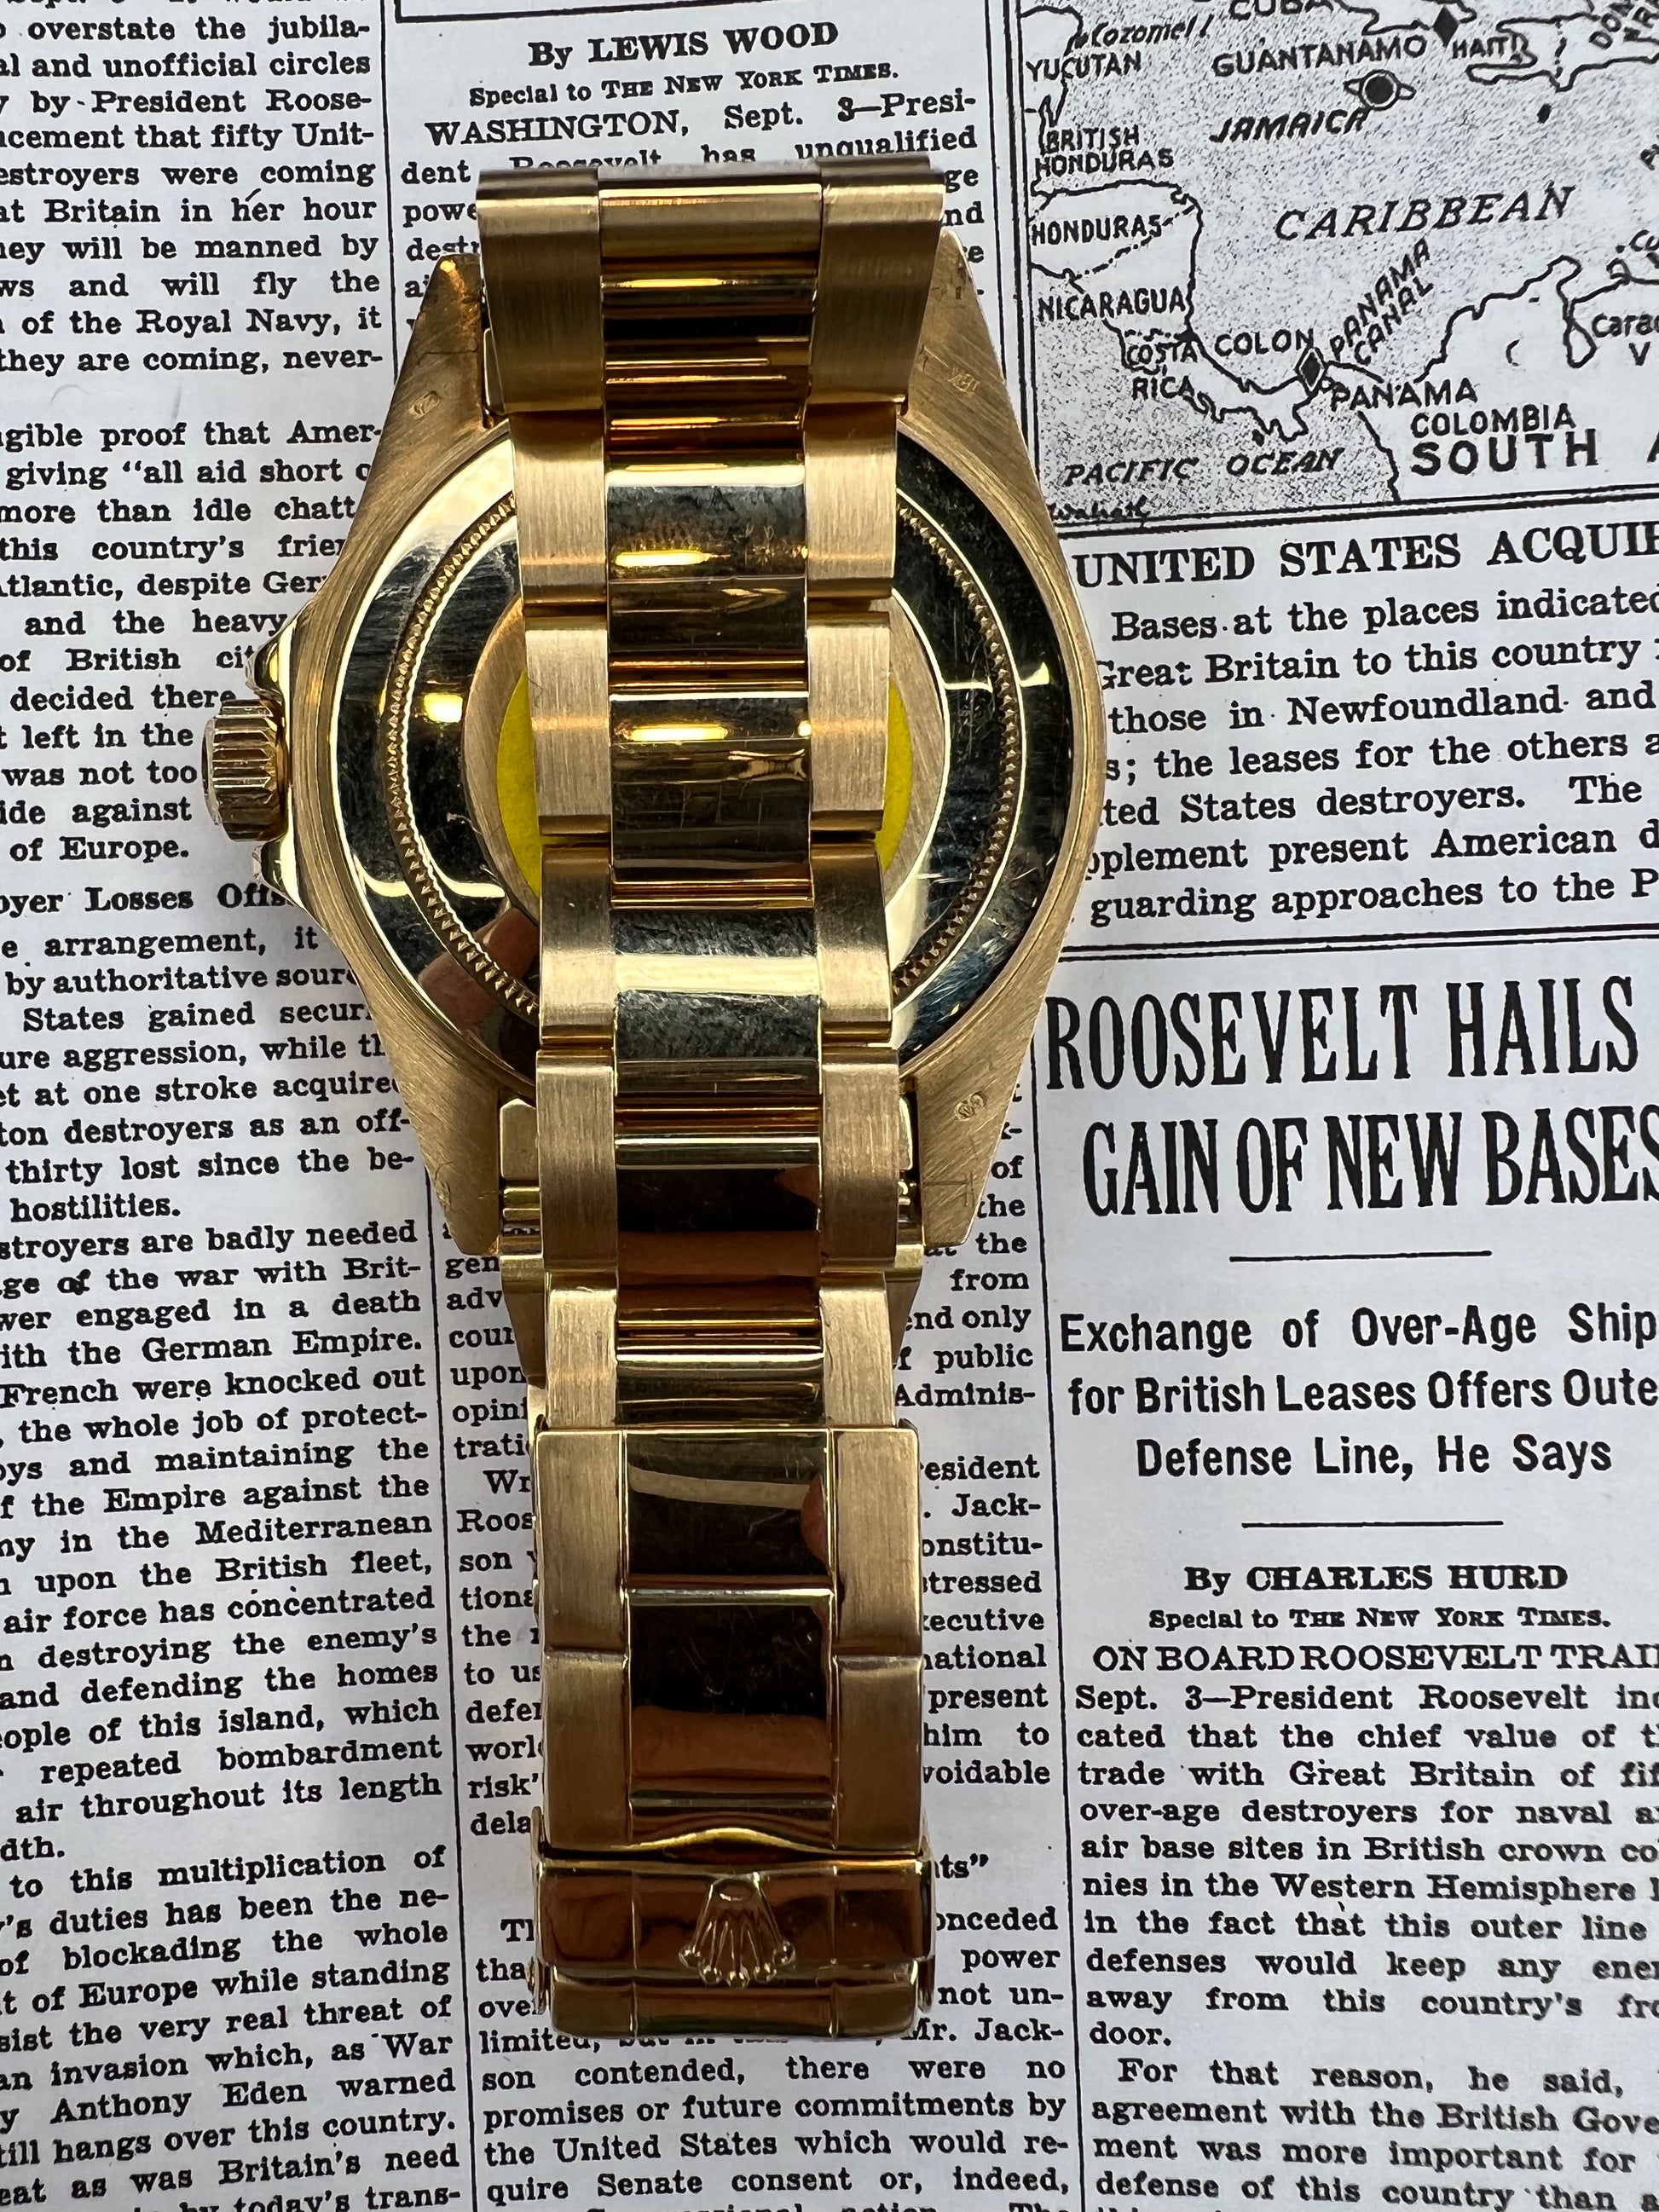 In Watches, Yellow Gold Is Back - The New York Times